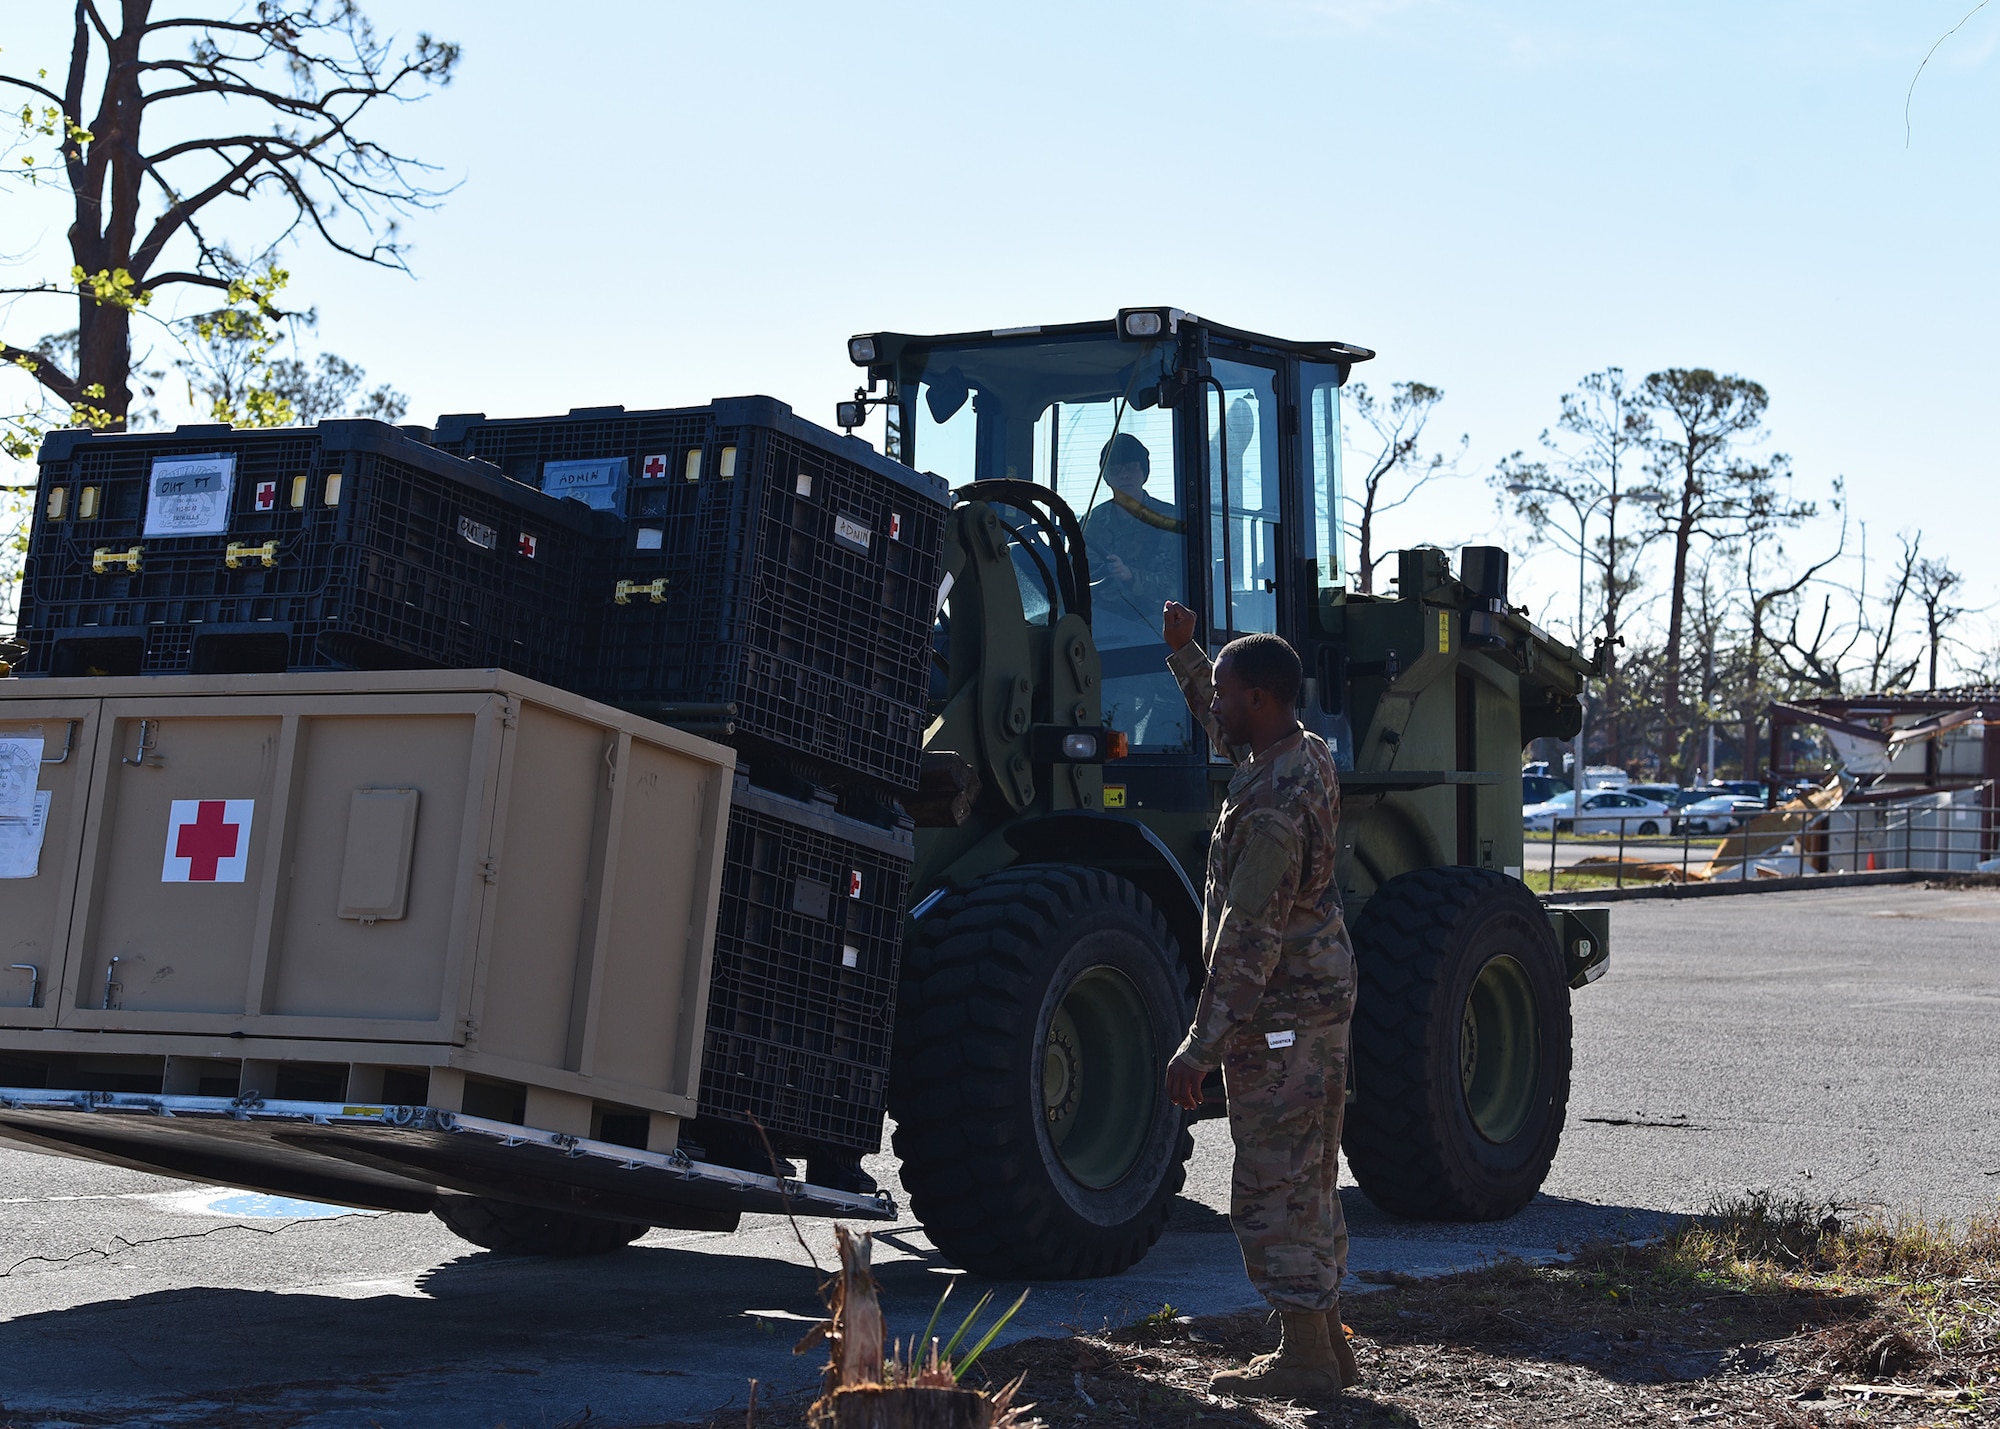 Staff Sgt. Dock Newell, 325th Medical Support Squadron medical material noncommissioned officer in charge, directs Airman Christian Myers, 1st Special Operations Logistics Readiness Squadron vehicle operator, where to stage a pallet of outpatient medical equipment at Tyndall Air Force Base, Fla., Nov. 27, 2018. Large-scale recovery efforts have continued in the weeks since Hurricane Michael struck the Florida panhandle and Tyndall AFB. (U.S. Air Force photo by Senior Airman Isaiah J. Soliz)